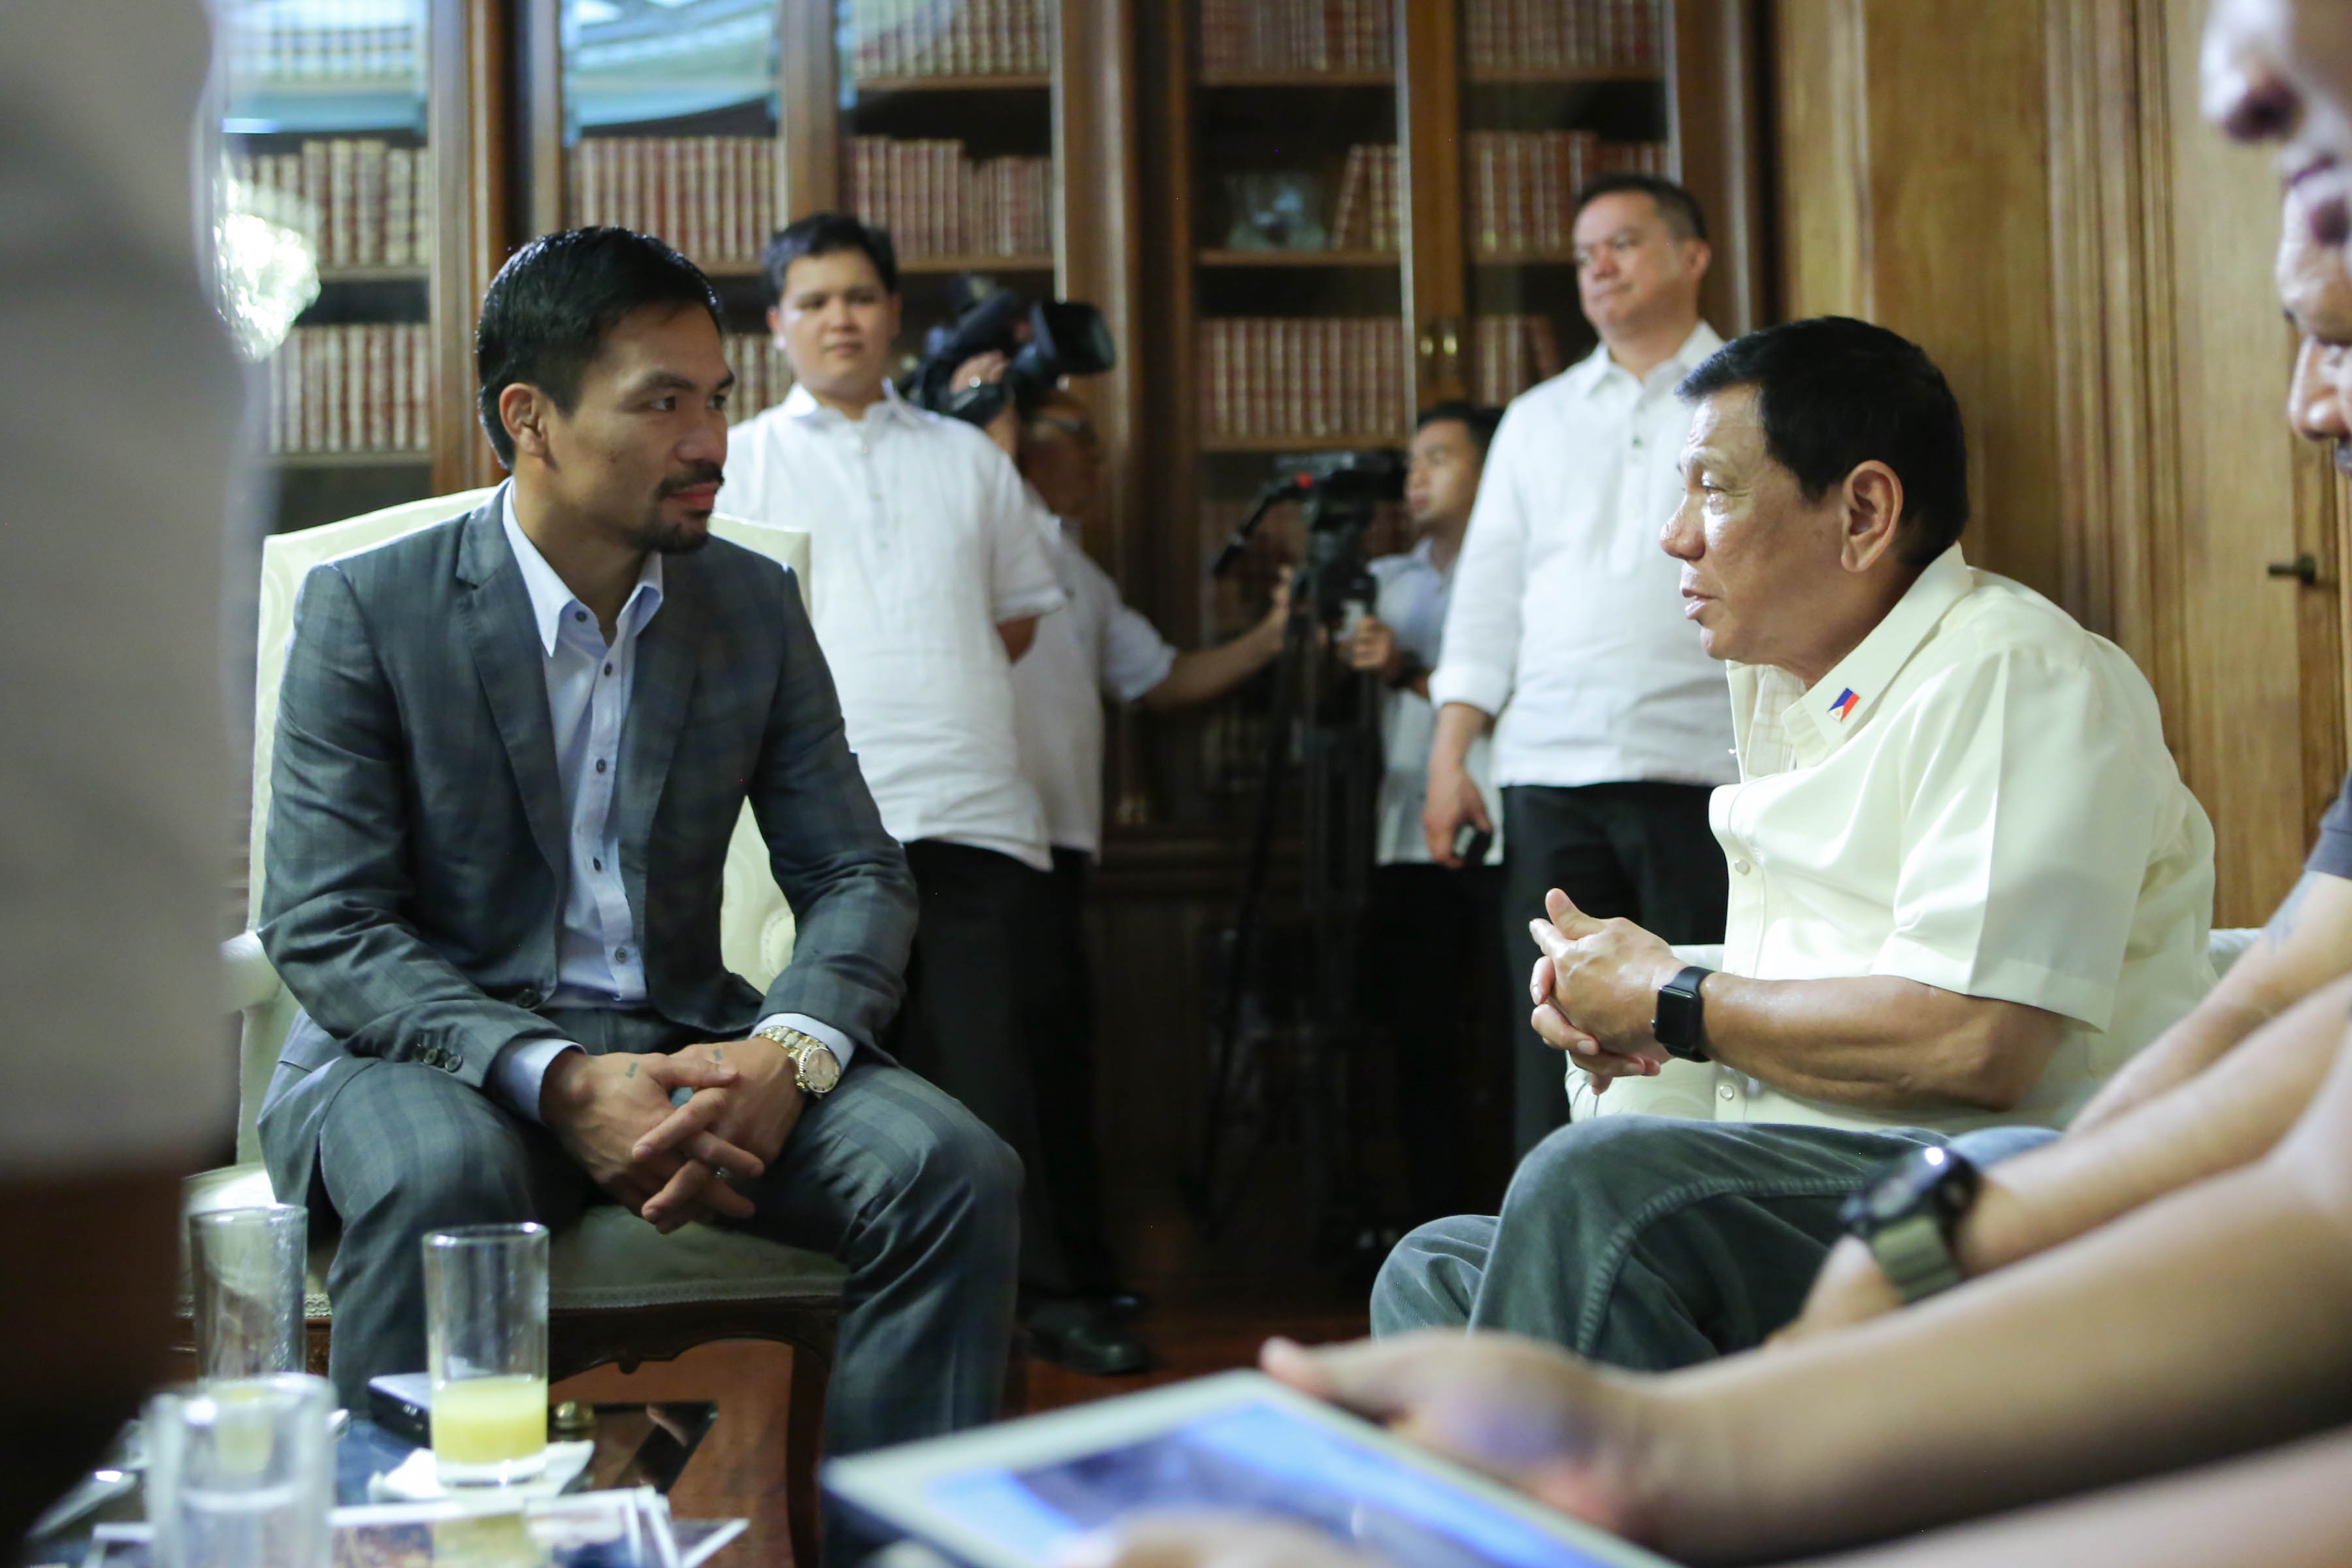 MINDANAOANS. President Rodrigo Duterte and neophyte senator Manny Pacquiao meet at Malacañang Palace on August 1, 2016. Photo by King Rodriguez/PPD 